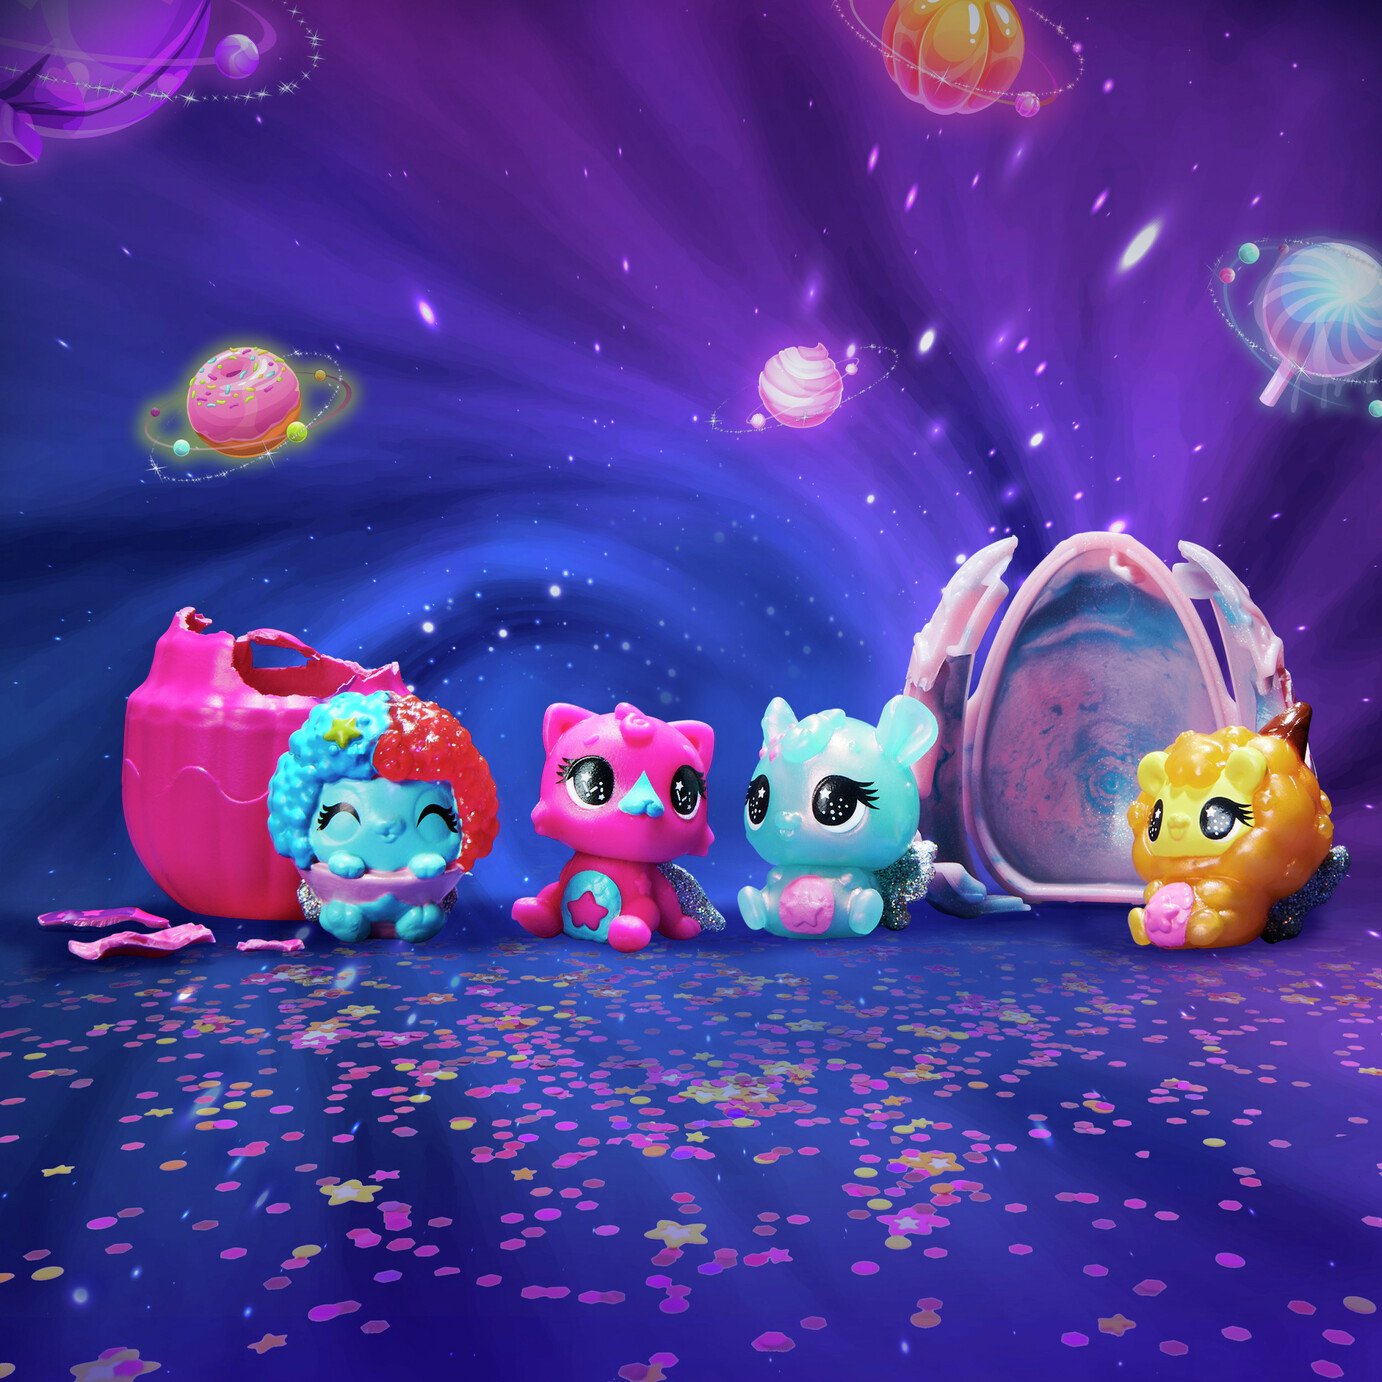 Hatchimals CollEGGtibles Series 8 Cosmic Candy Multipack Review